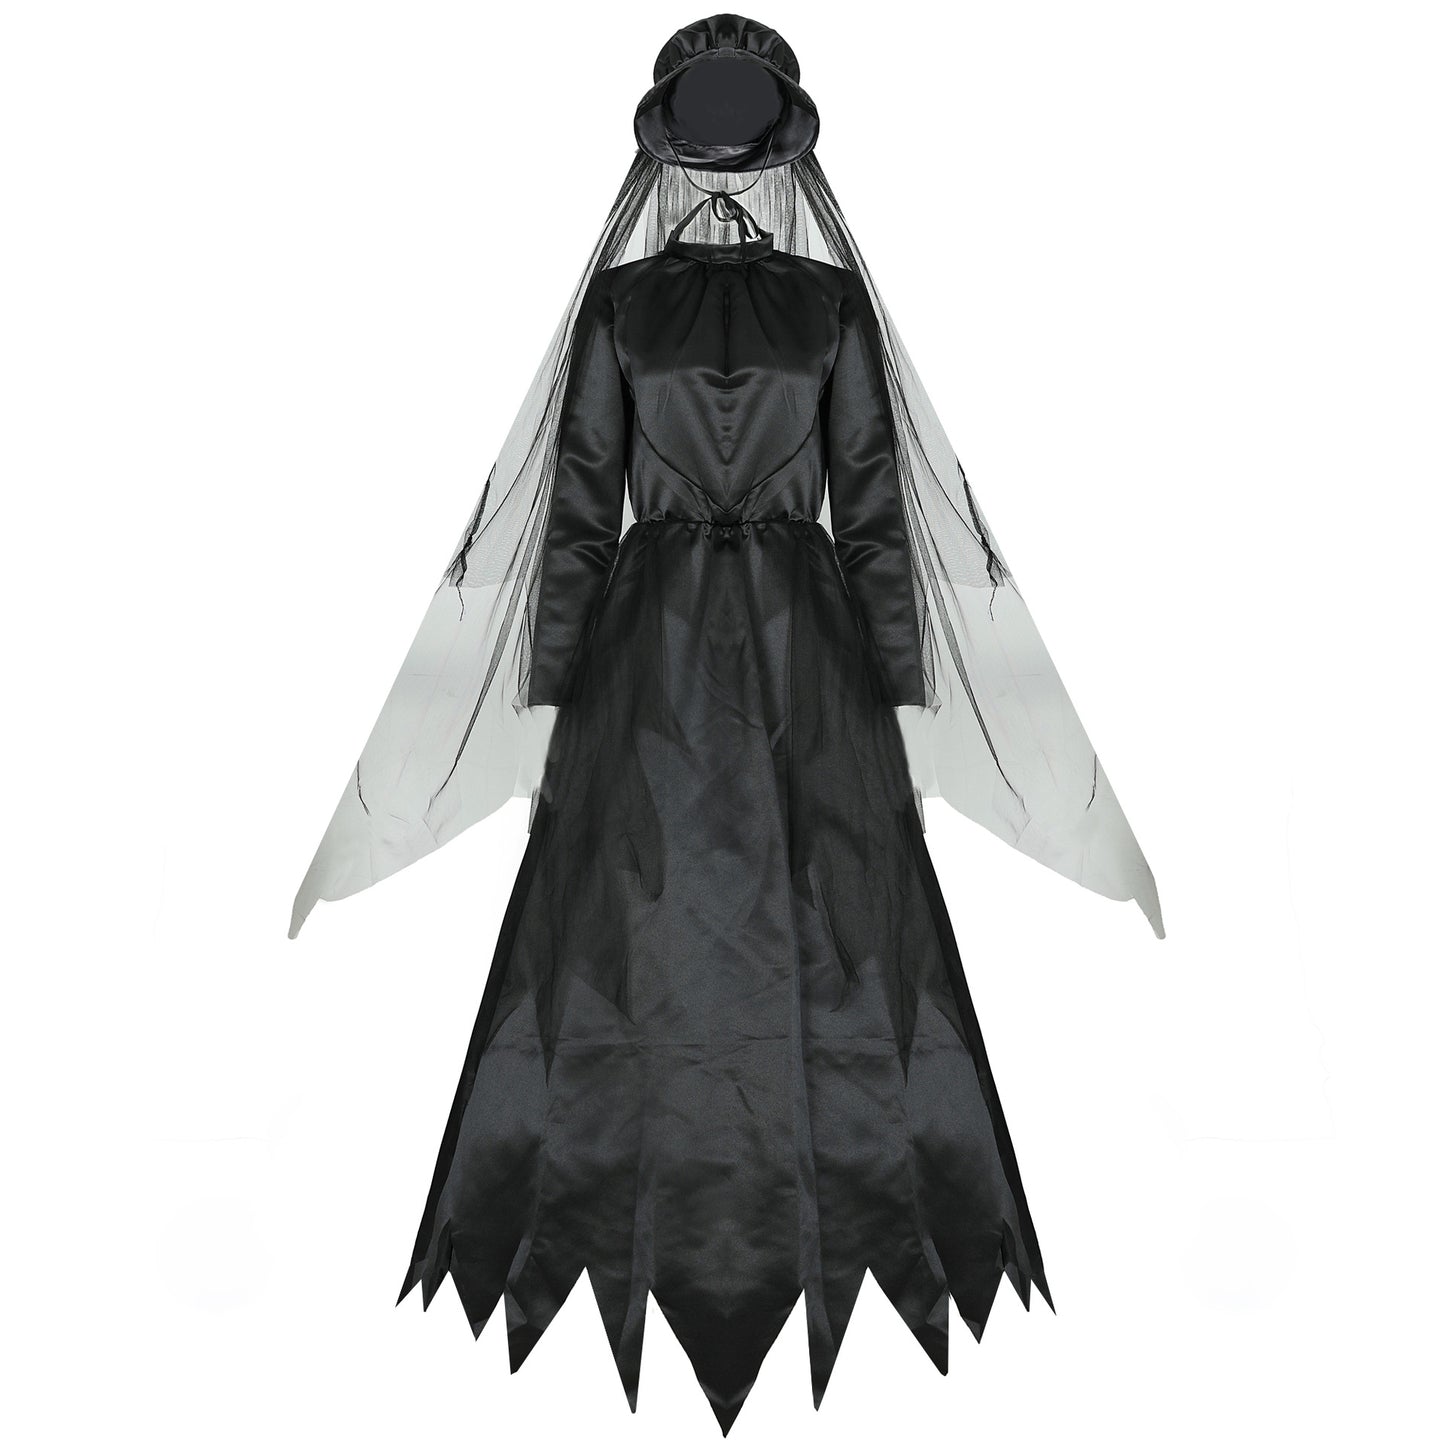 Scary Women's Cosplay Costumes Halloween Party Carnival Wedding Bride Dress Evil Ghost Vampire Anime Game Outfit Headwear